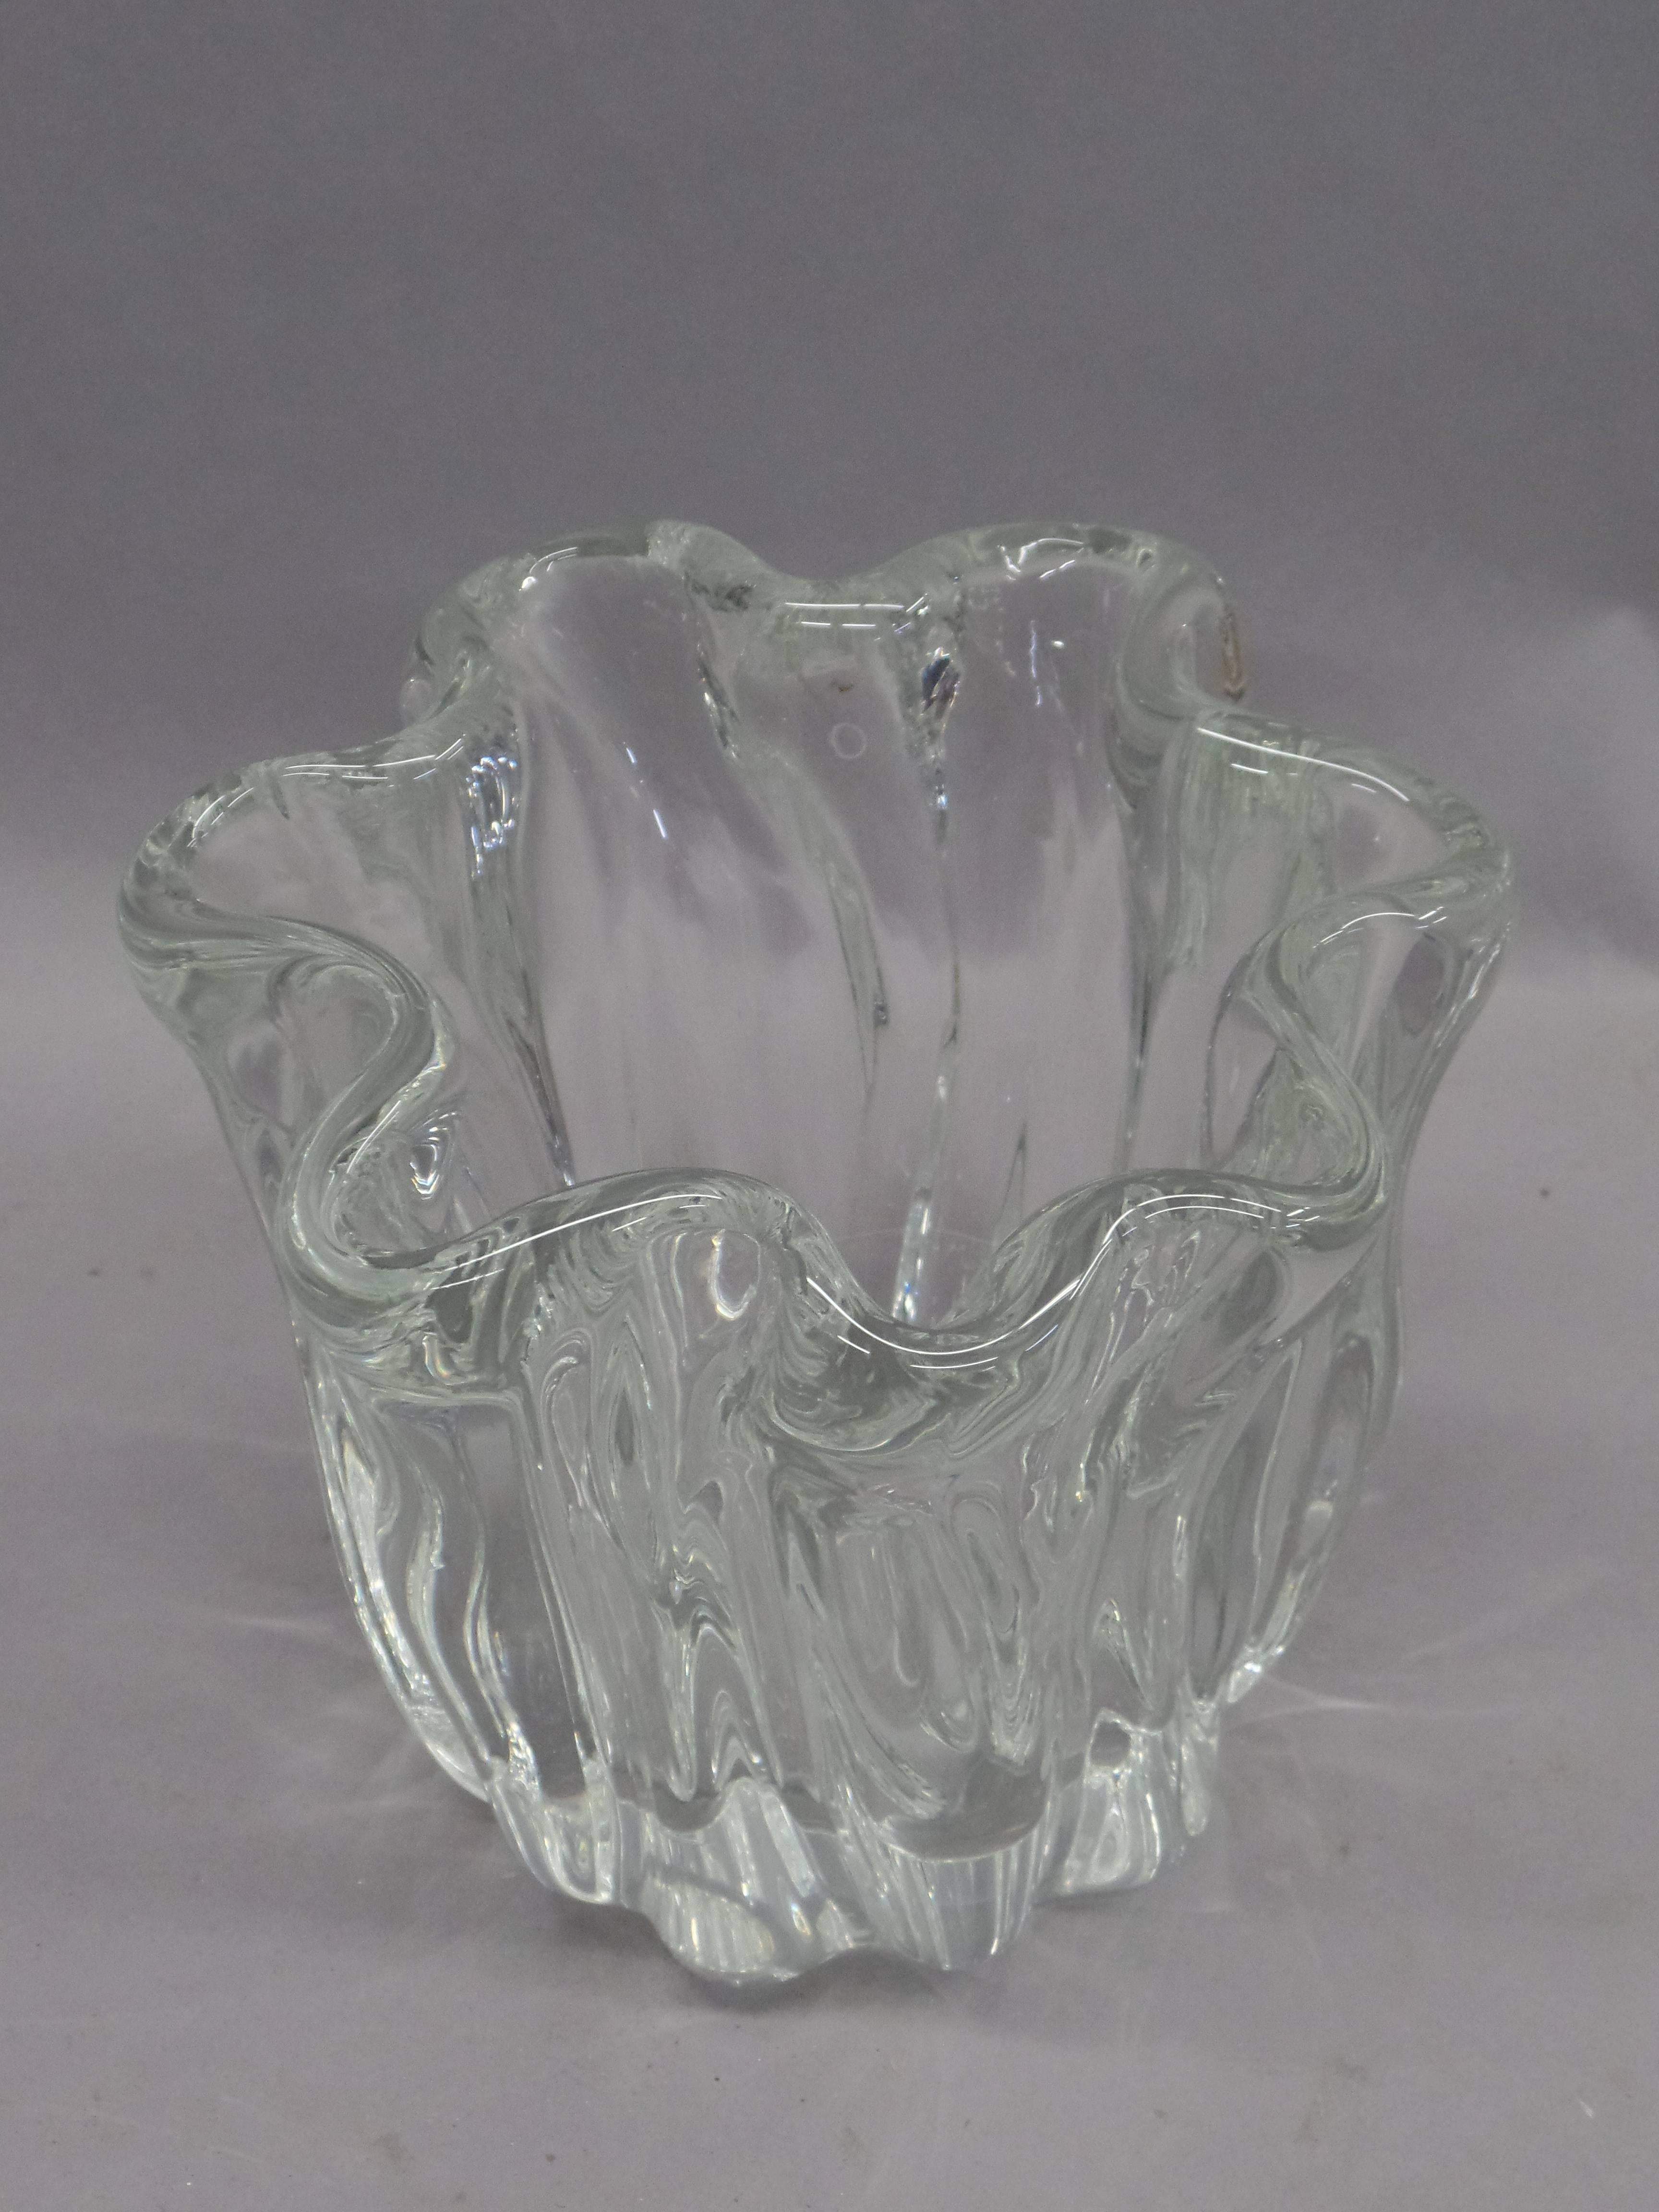 Scandinavian Mid-Century Modern vase in clear thick mold blown glass by Timo Sarpaneva. 

Rare, small production.